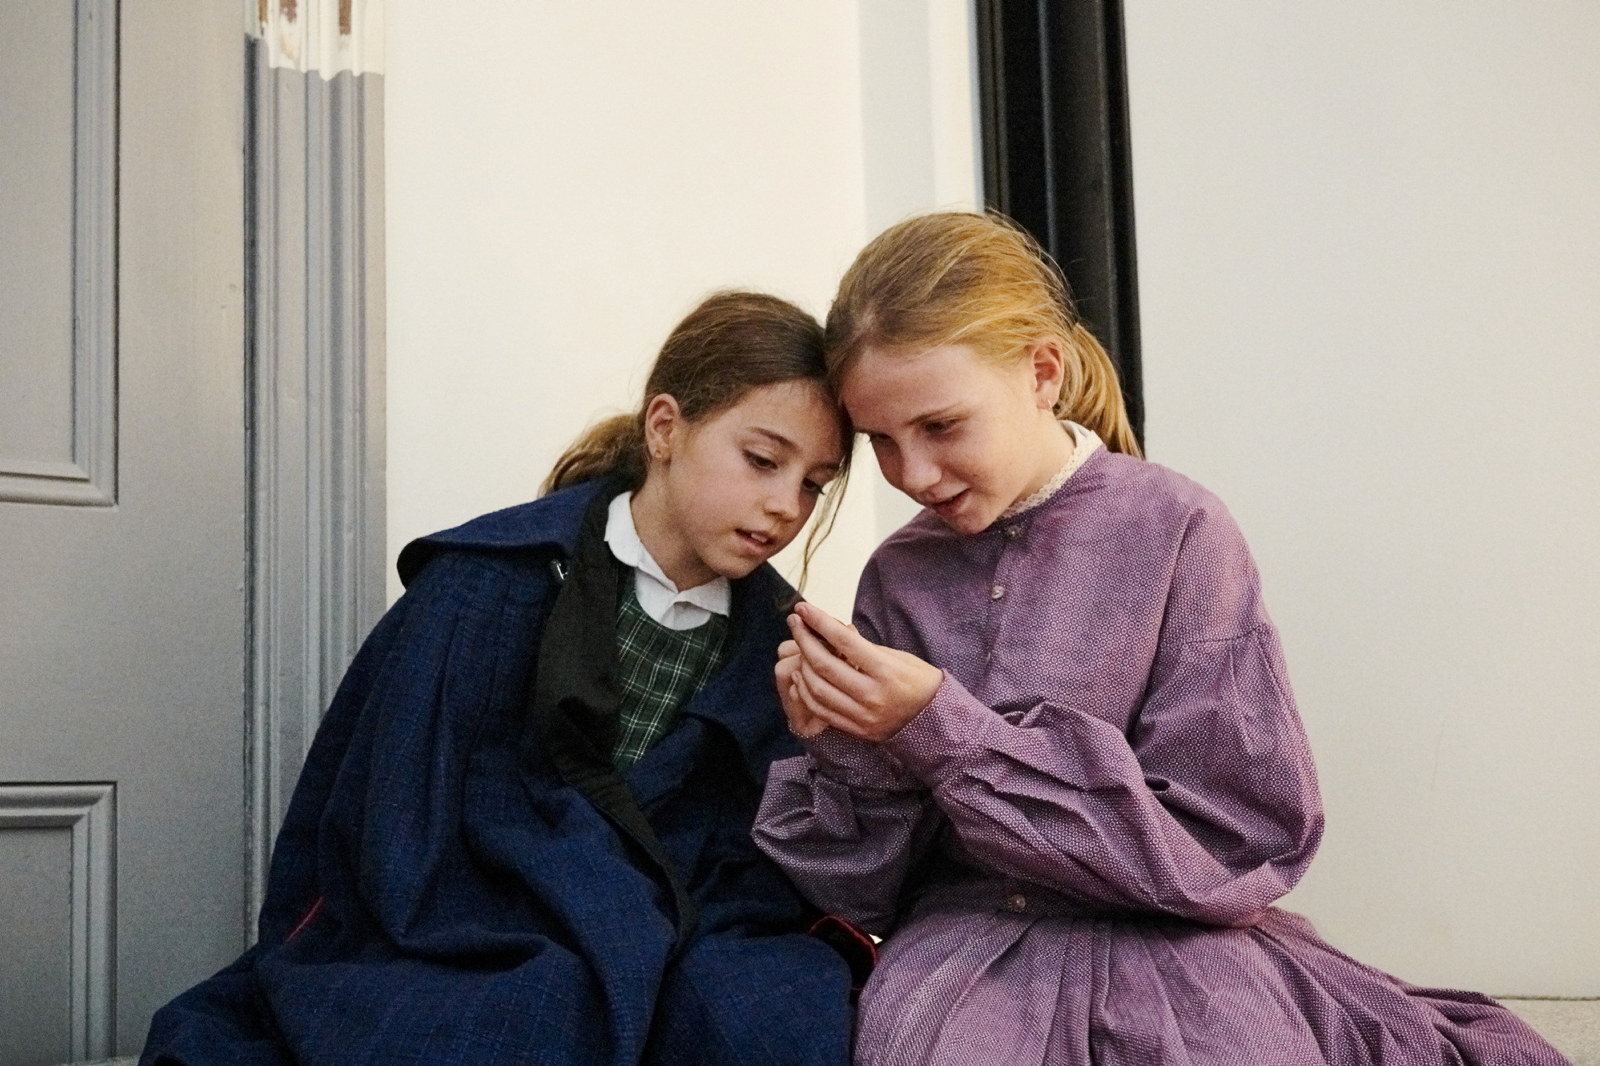 Two girls dressed in costume in large dormitory style room.